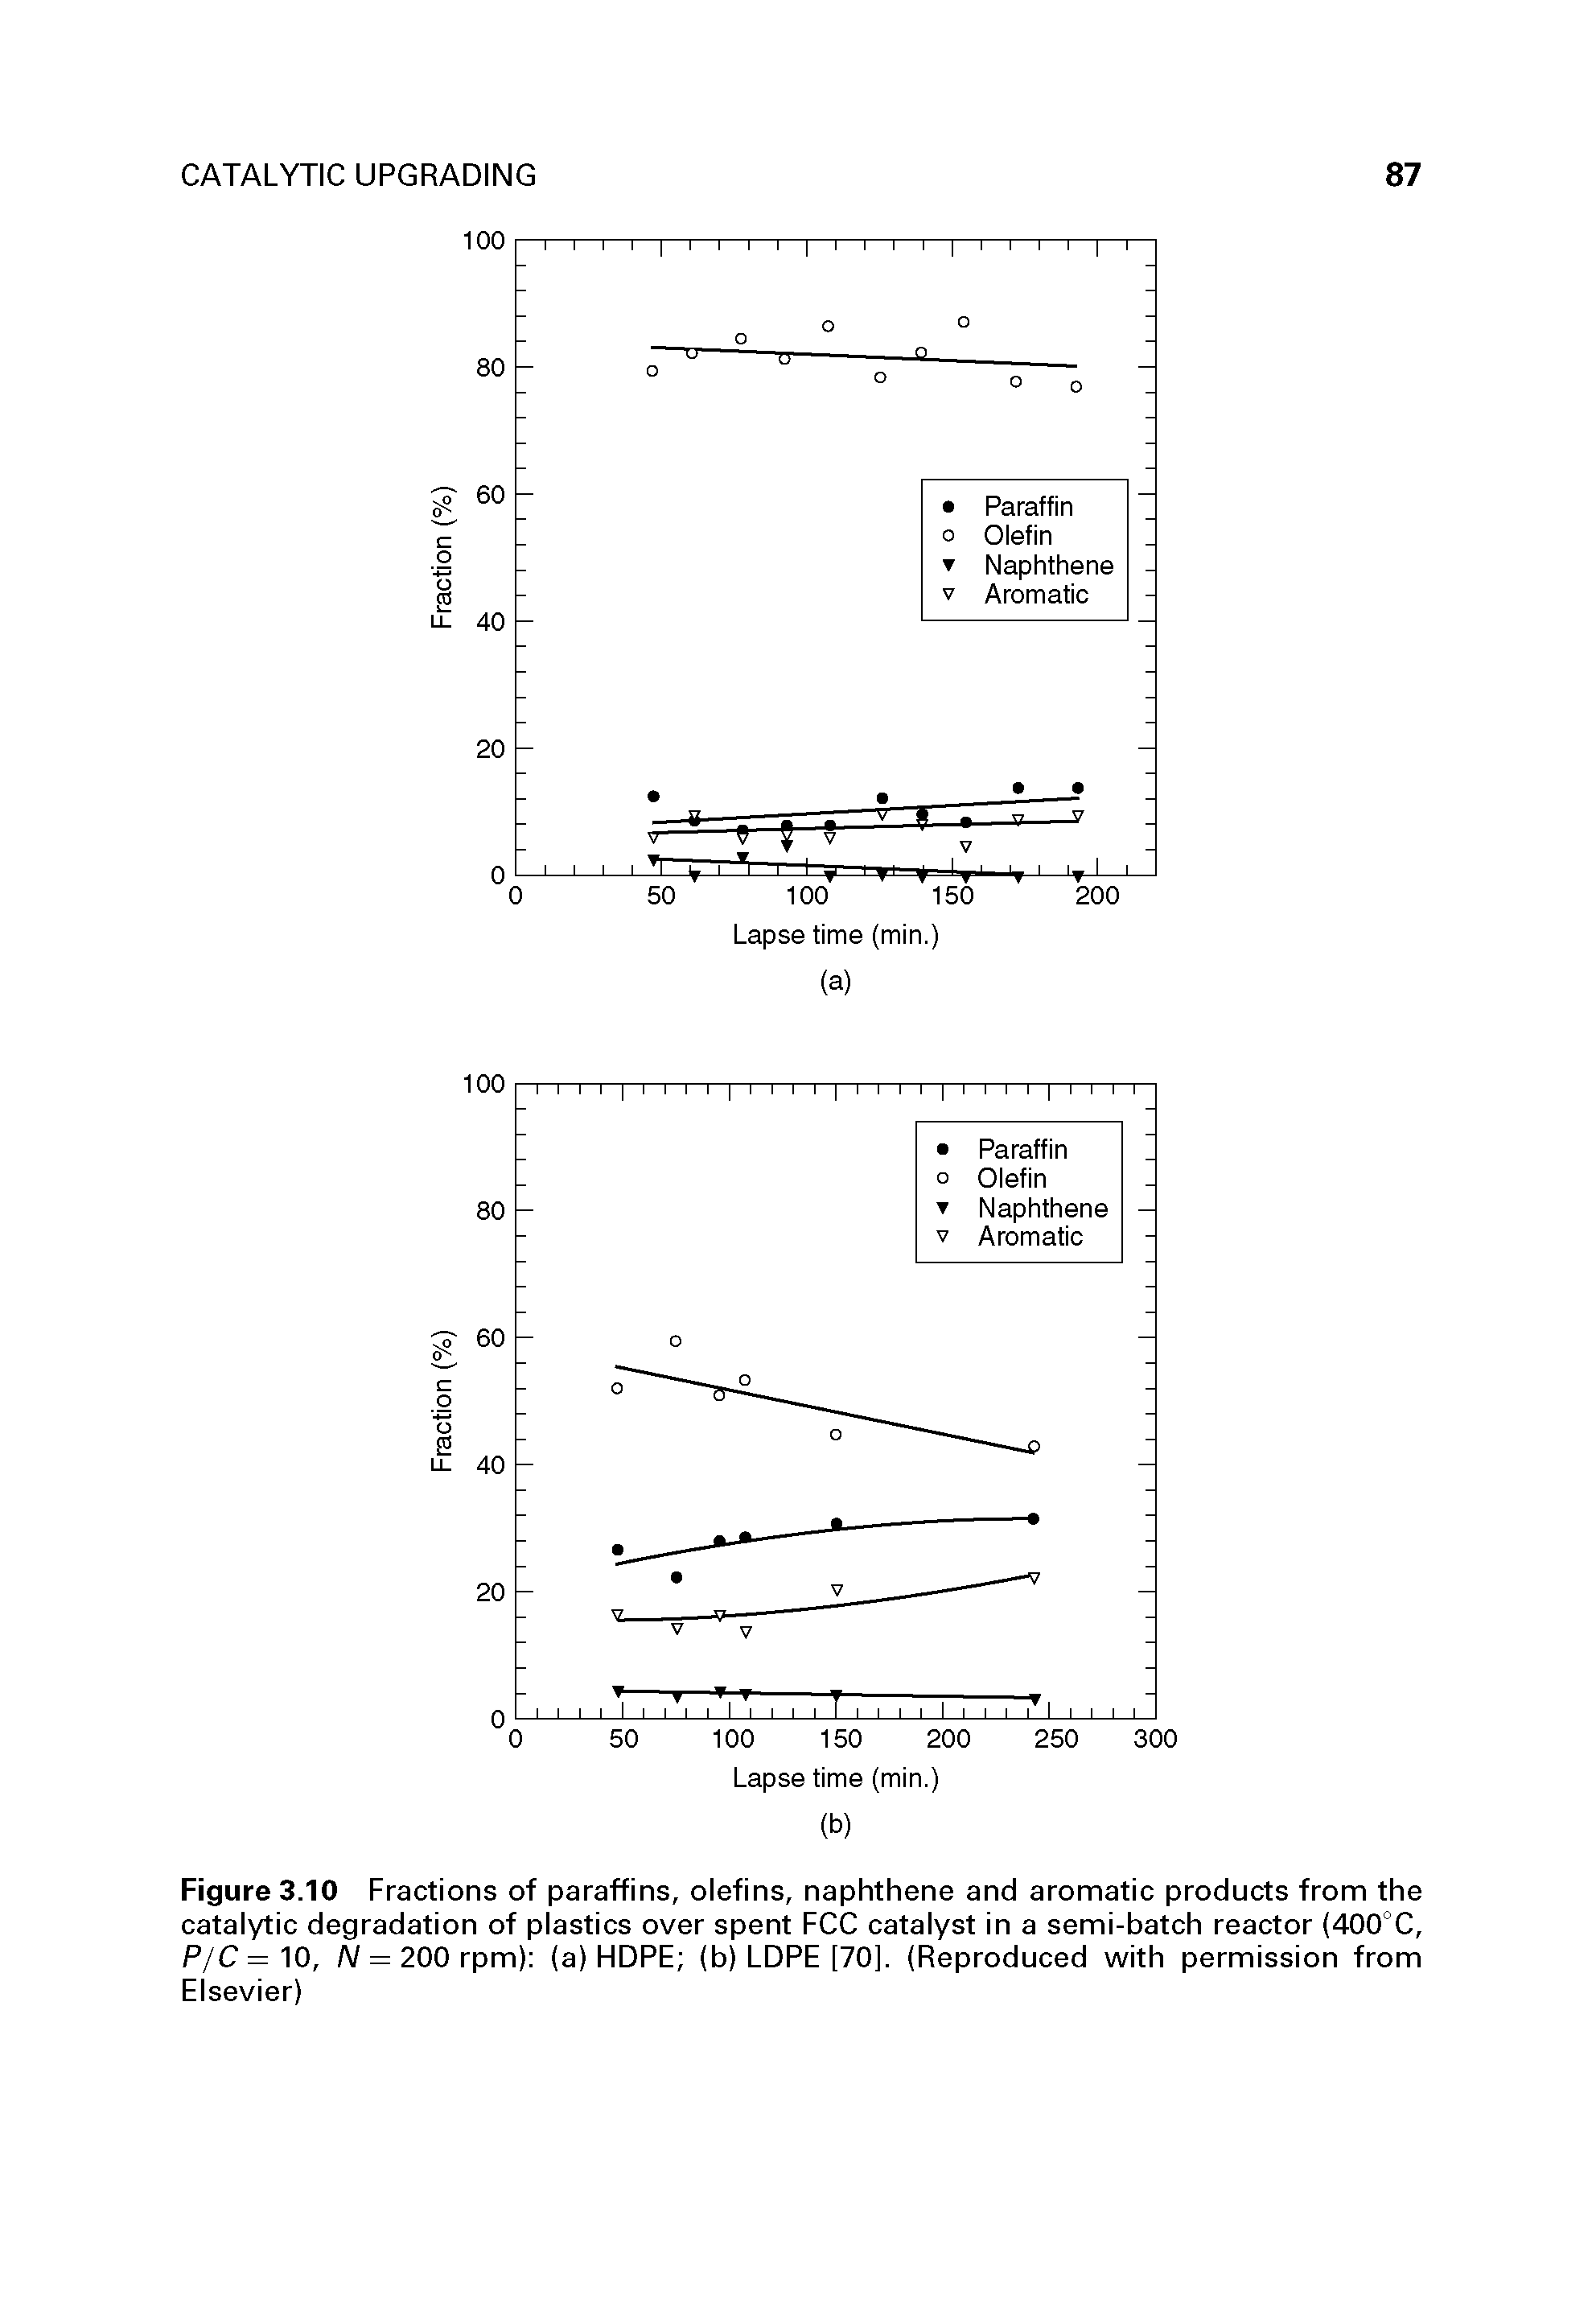 Figure 3.10 Fractions of paraffins, olefins, naphthene and aromatic products from the catalytic degradation of plastics over spent FCC catalyst in a semi-batch reactor (400°C, P/C= 10, A/= 200 rpm) (a) HDPE (b) LDPE [70]. (Reproduced with permission from Elsevier)...